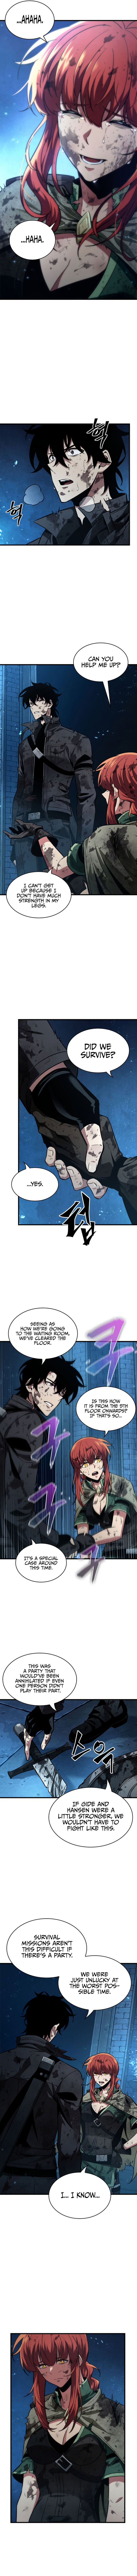 Pick Me Up Chapter 12 page 8